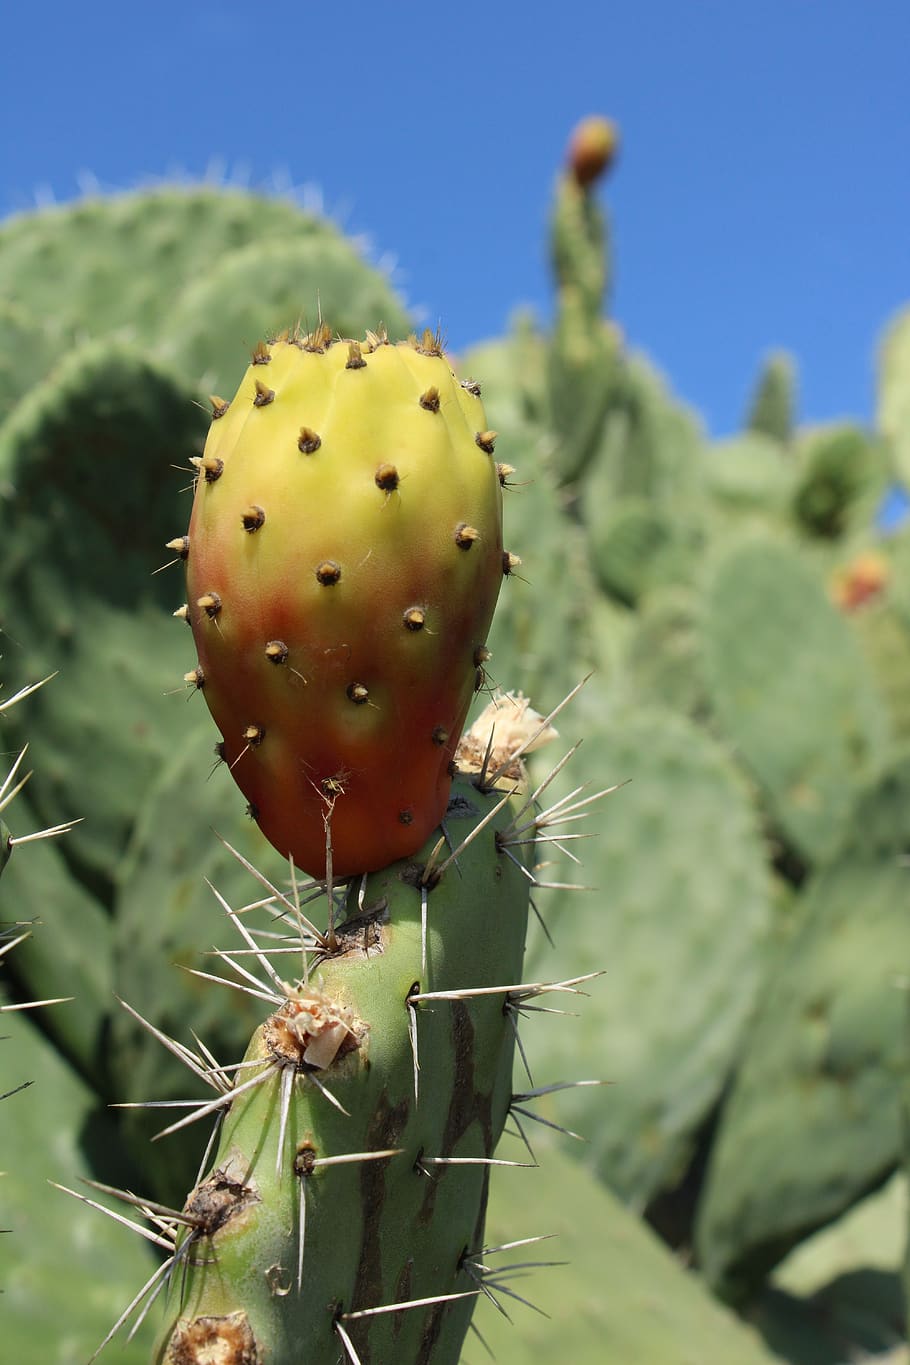 cactus, cactus fruit, spur, prickly pear, succulent plant, prickly pear cactus, plant, thorn, nature, focus on foreground